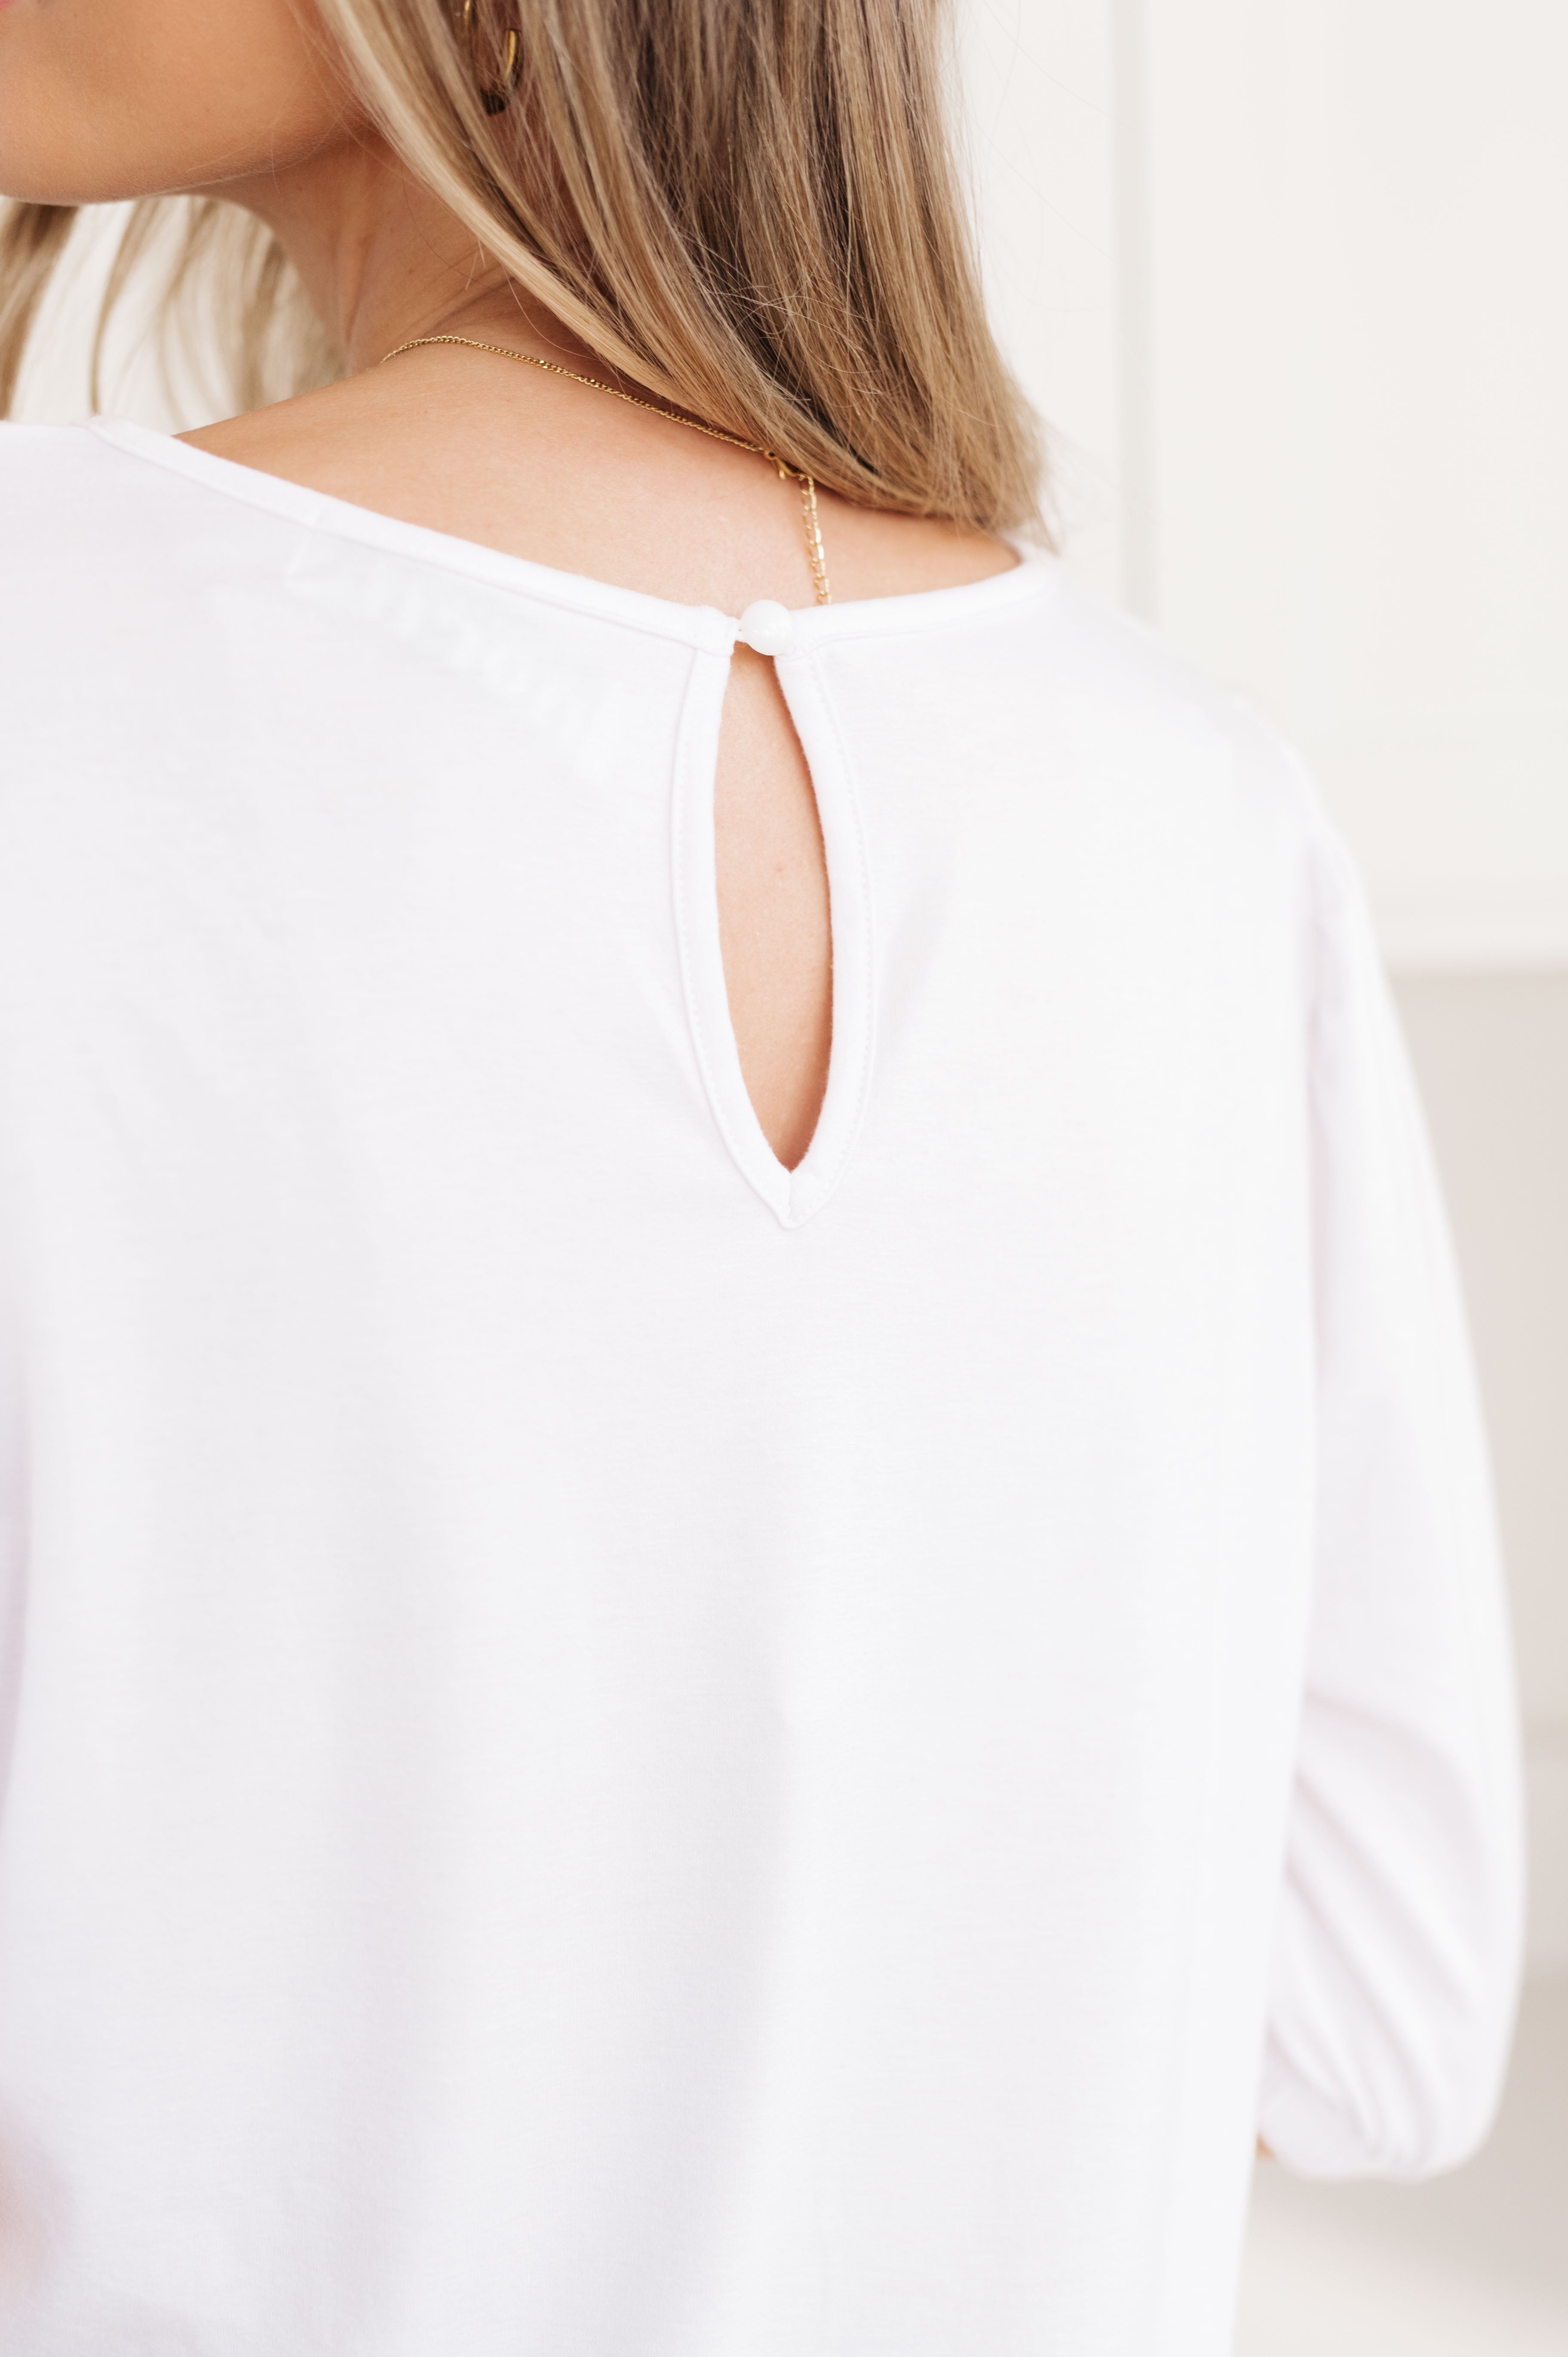 New Days Ahead White Blouse